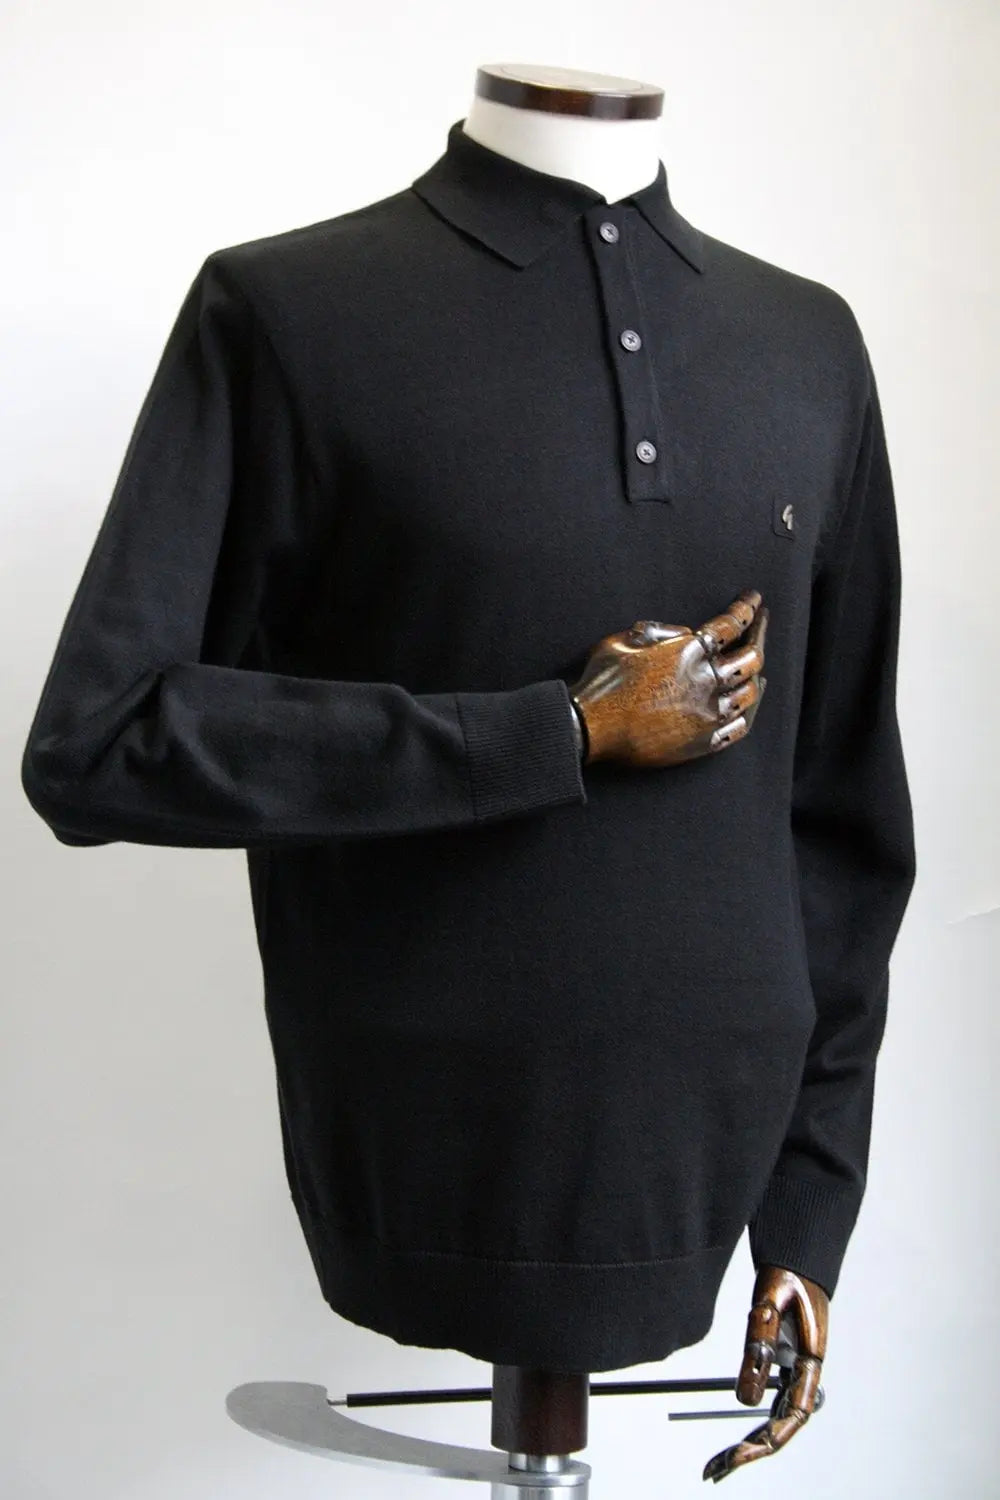 Gabicci Vintage Francesco Black Long-Sleeved Knitted Polo Shirt From Woven Durham